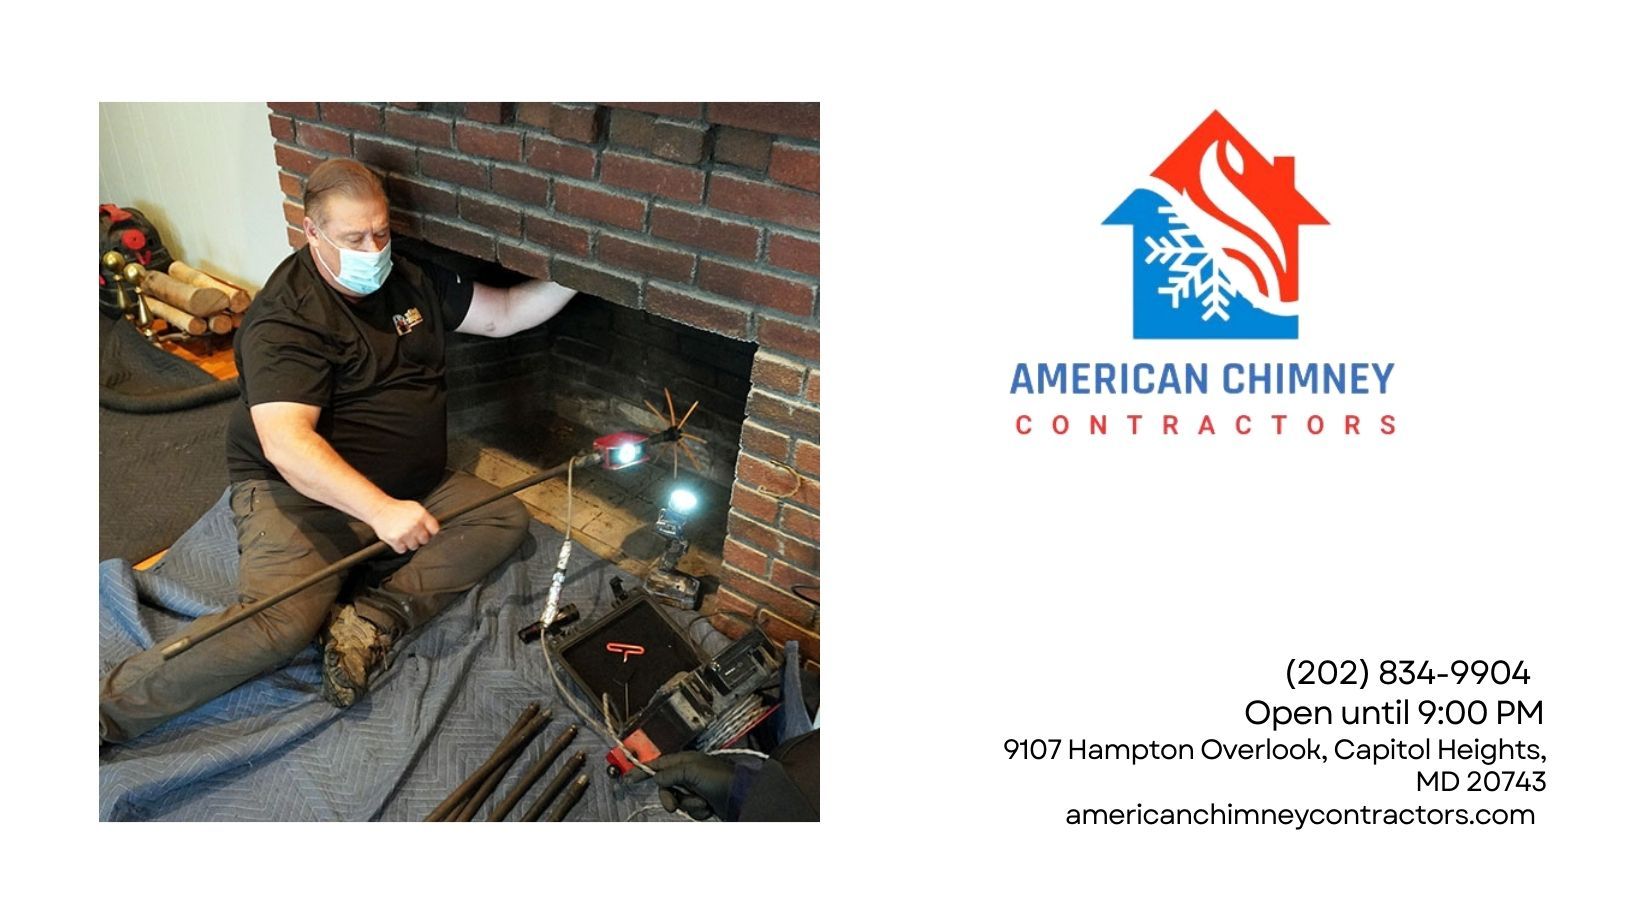 Chimney Contractor in Capitol Heights, Maryland